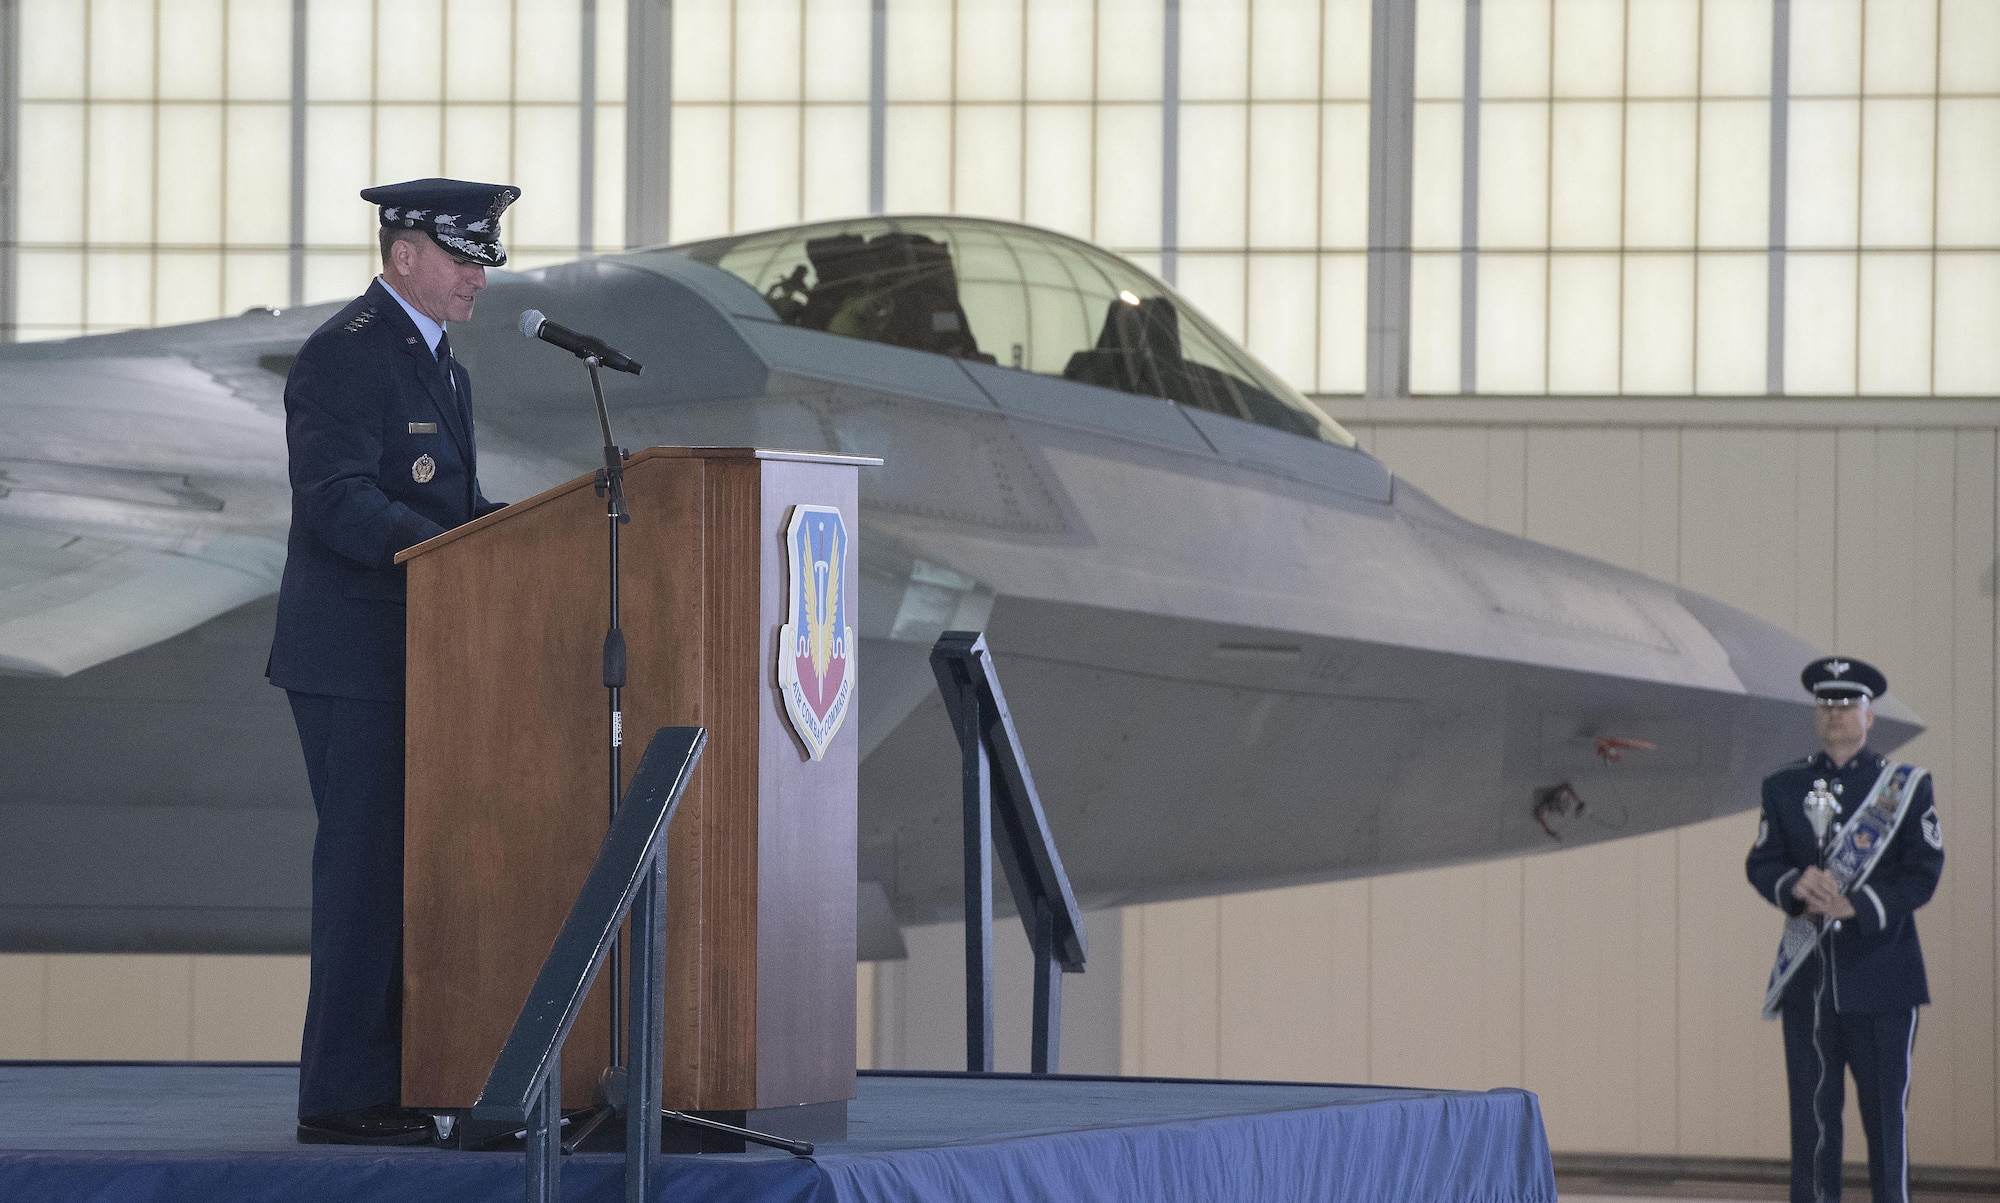 U.S. Air Force Chief of Staff Gen. David L. Goldfein speaks during ACC’s Change of Command ceremony at Joint Base Langley-Eustis, Va., March 10, 2017. Gen. James M. Holmes assumed command from Gen. Herbert “Hawk” Carlisle, who retired after 39 years of service to the Air Force. (U.S. Air Force photo/Senior Airman Kimberly Nagle)